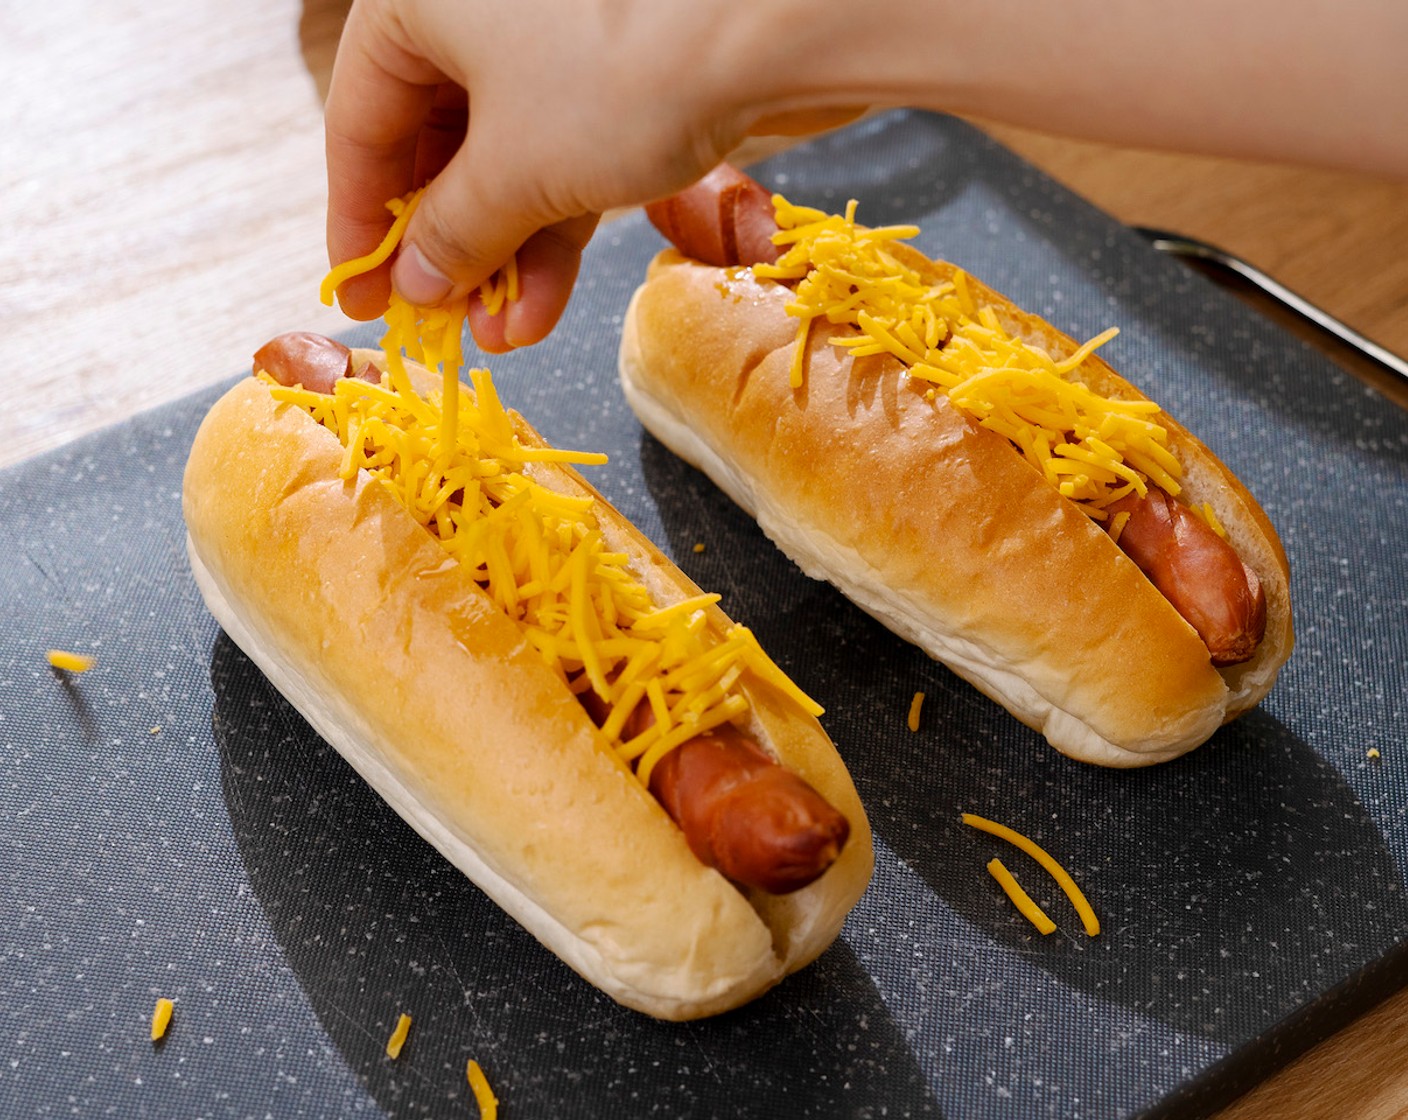 step 4 Place the hotdog into the Hot Dog Buns (4), top with Shredded Cheddar Cheese (1/2 cup), and back into the Air-fryer cook for another 2 minutes.